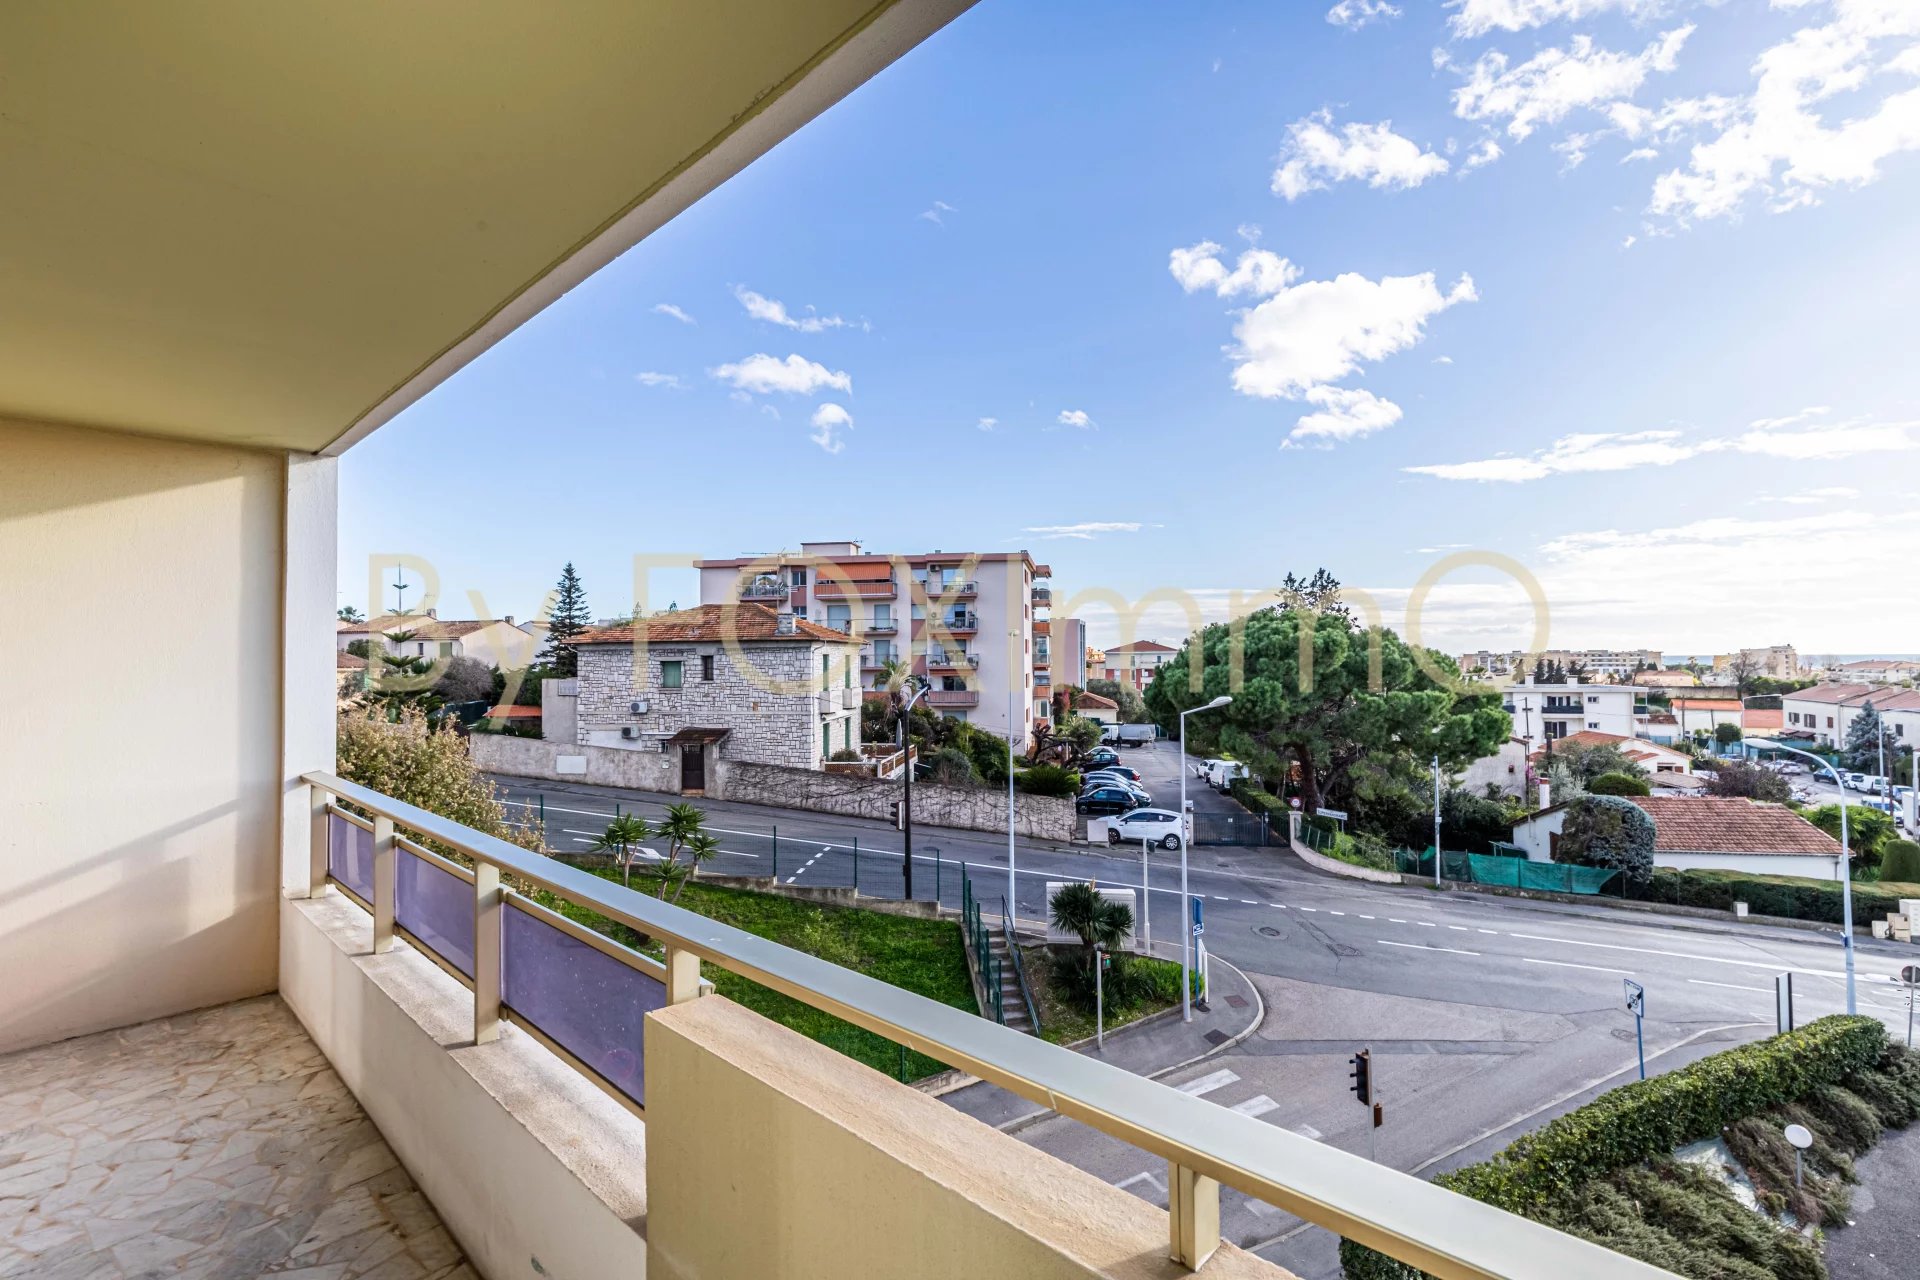 On the French Riviera, superb 4 room flat with sea view terrace, basement parking and cellar, 5 minutes from the sea